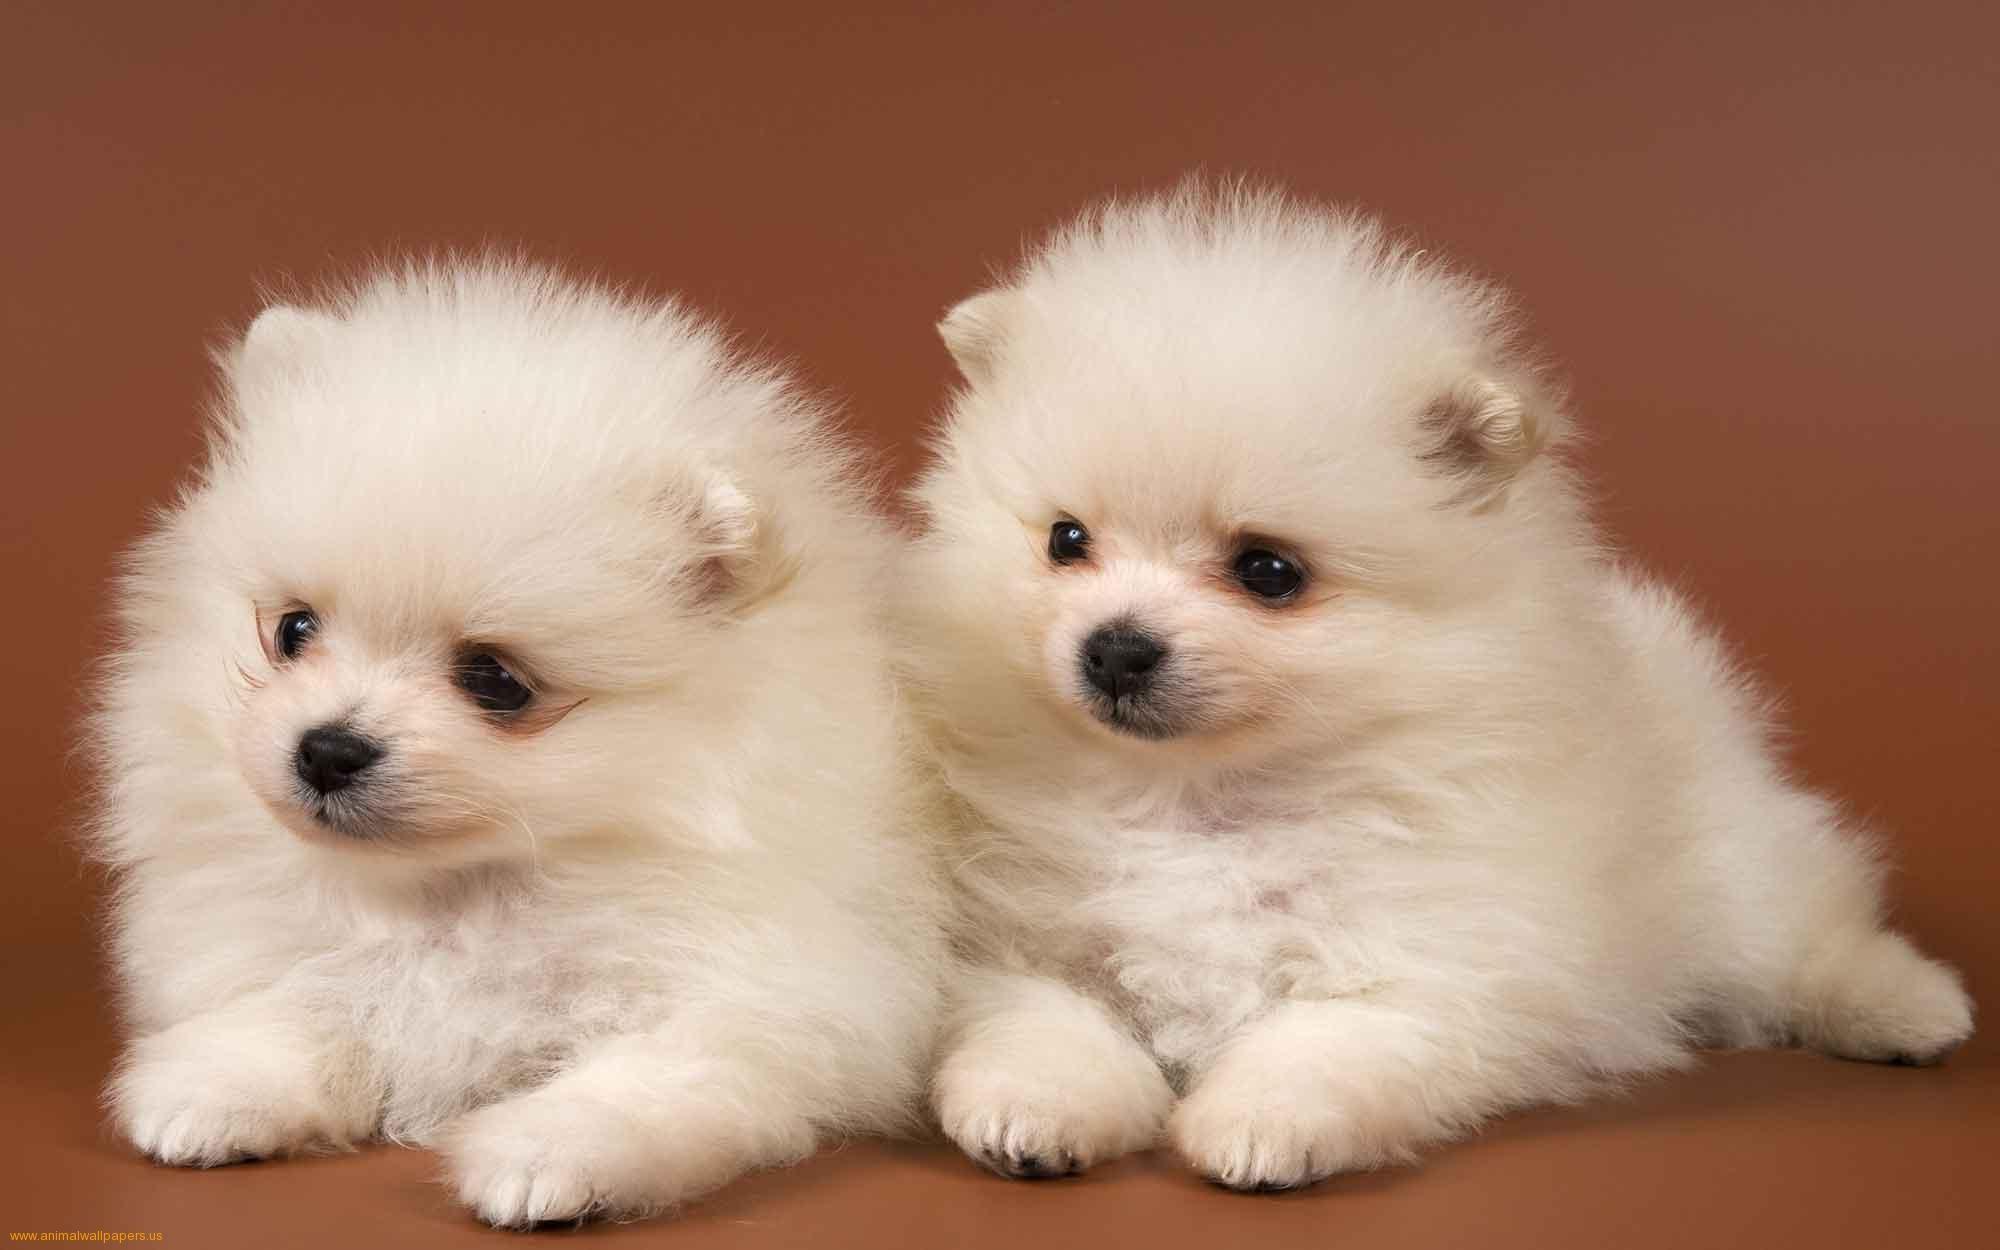 Best HD Cute Puppies Wallpaper and Picture download for free